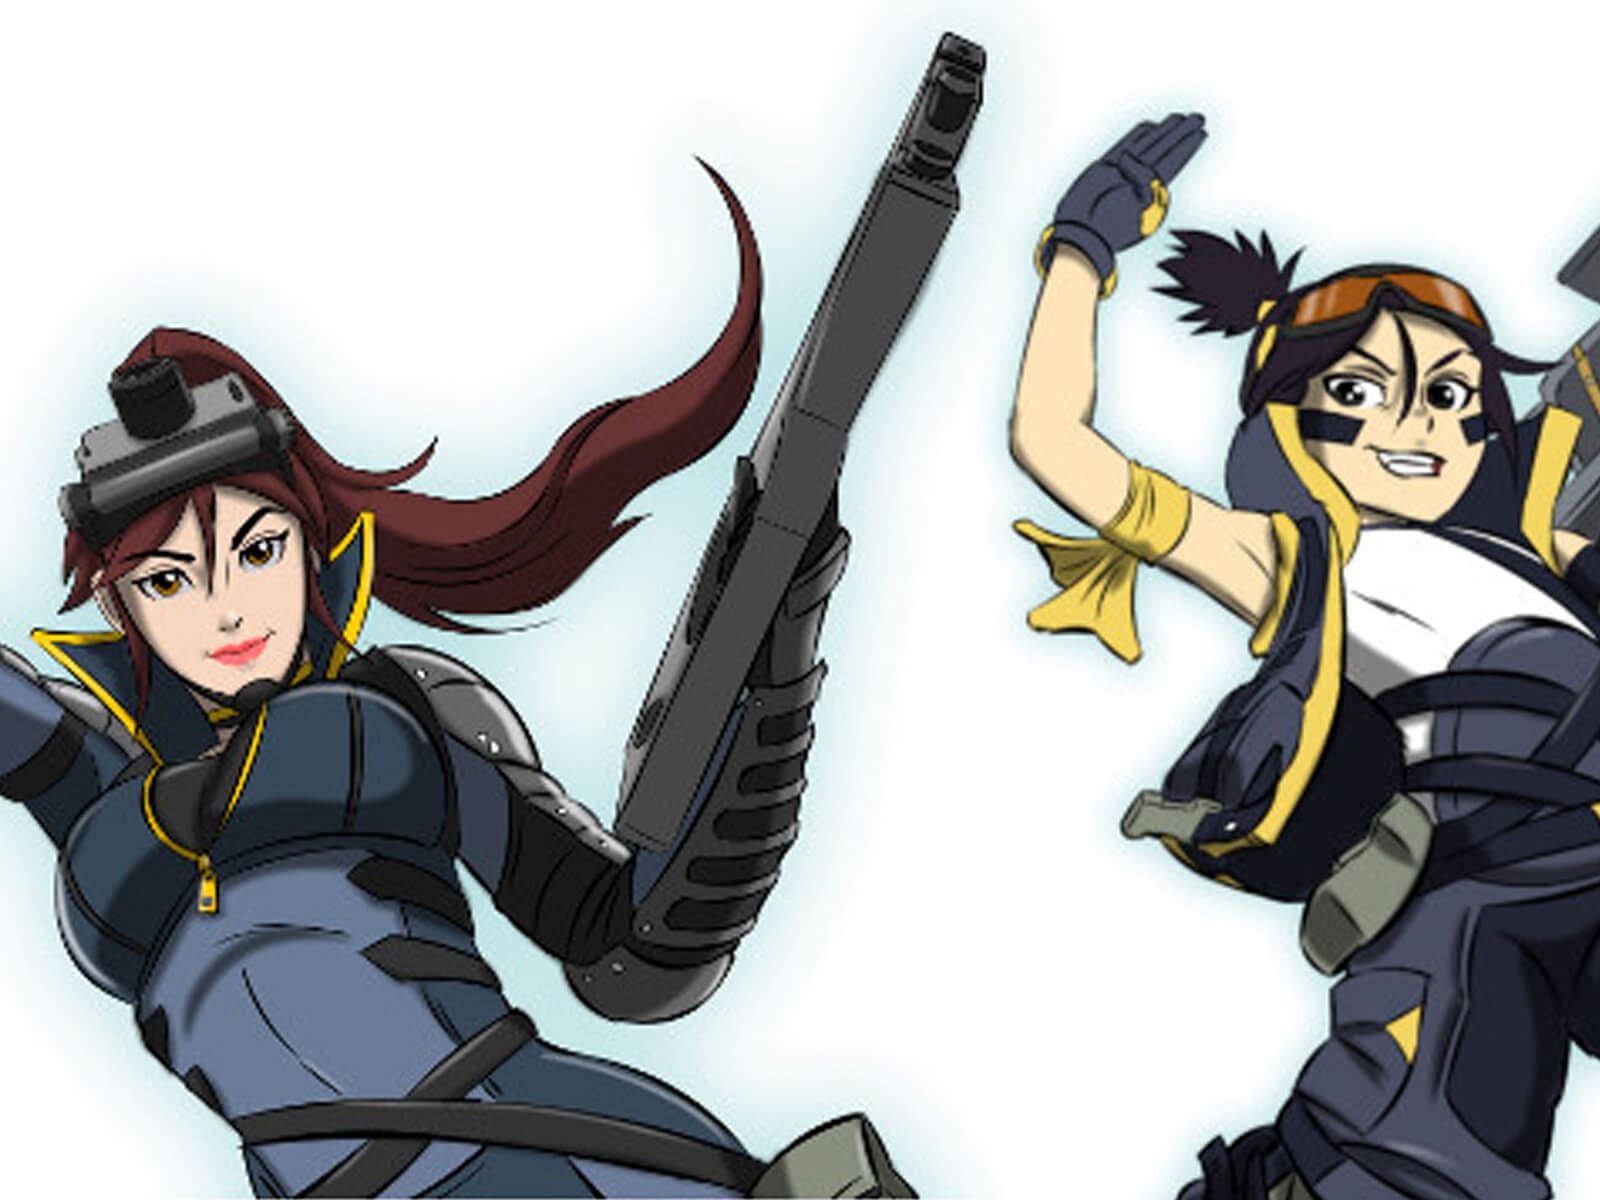 Two anime-style women are posed armed with guns and other weaponry